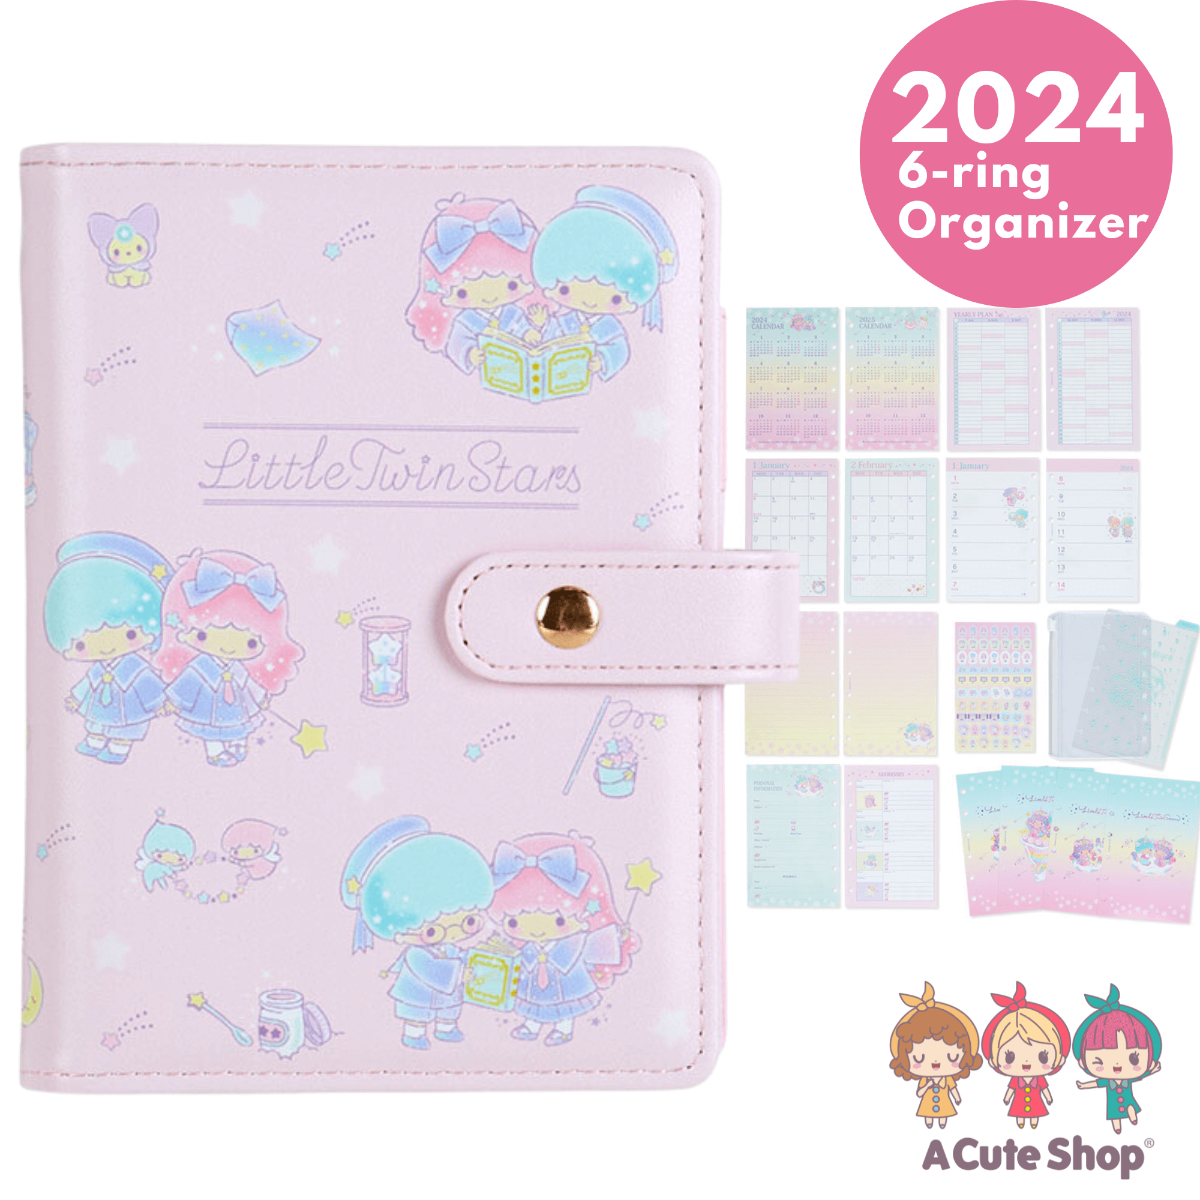 2023- 2024 Little Twin Stars 6-Rings Personal Organizer Compact Planner Schedule Book Agenda PINK A Cute Shop - Inspired by You For The Cute Soul 